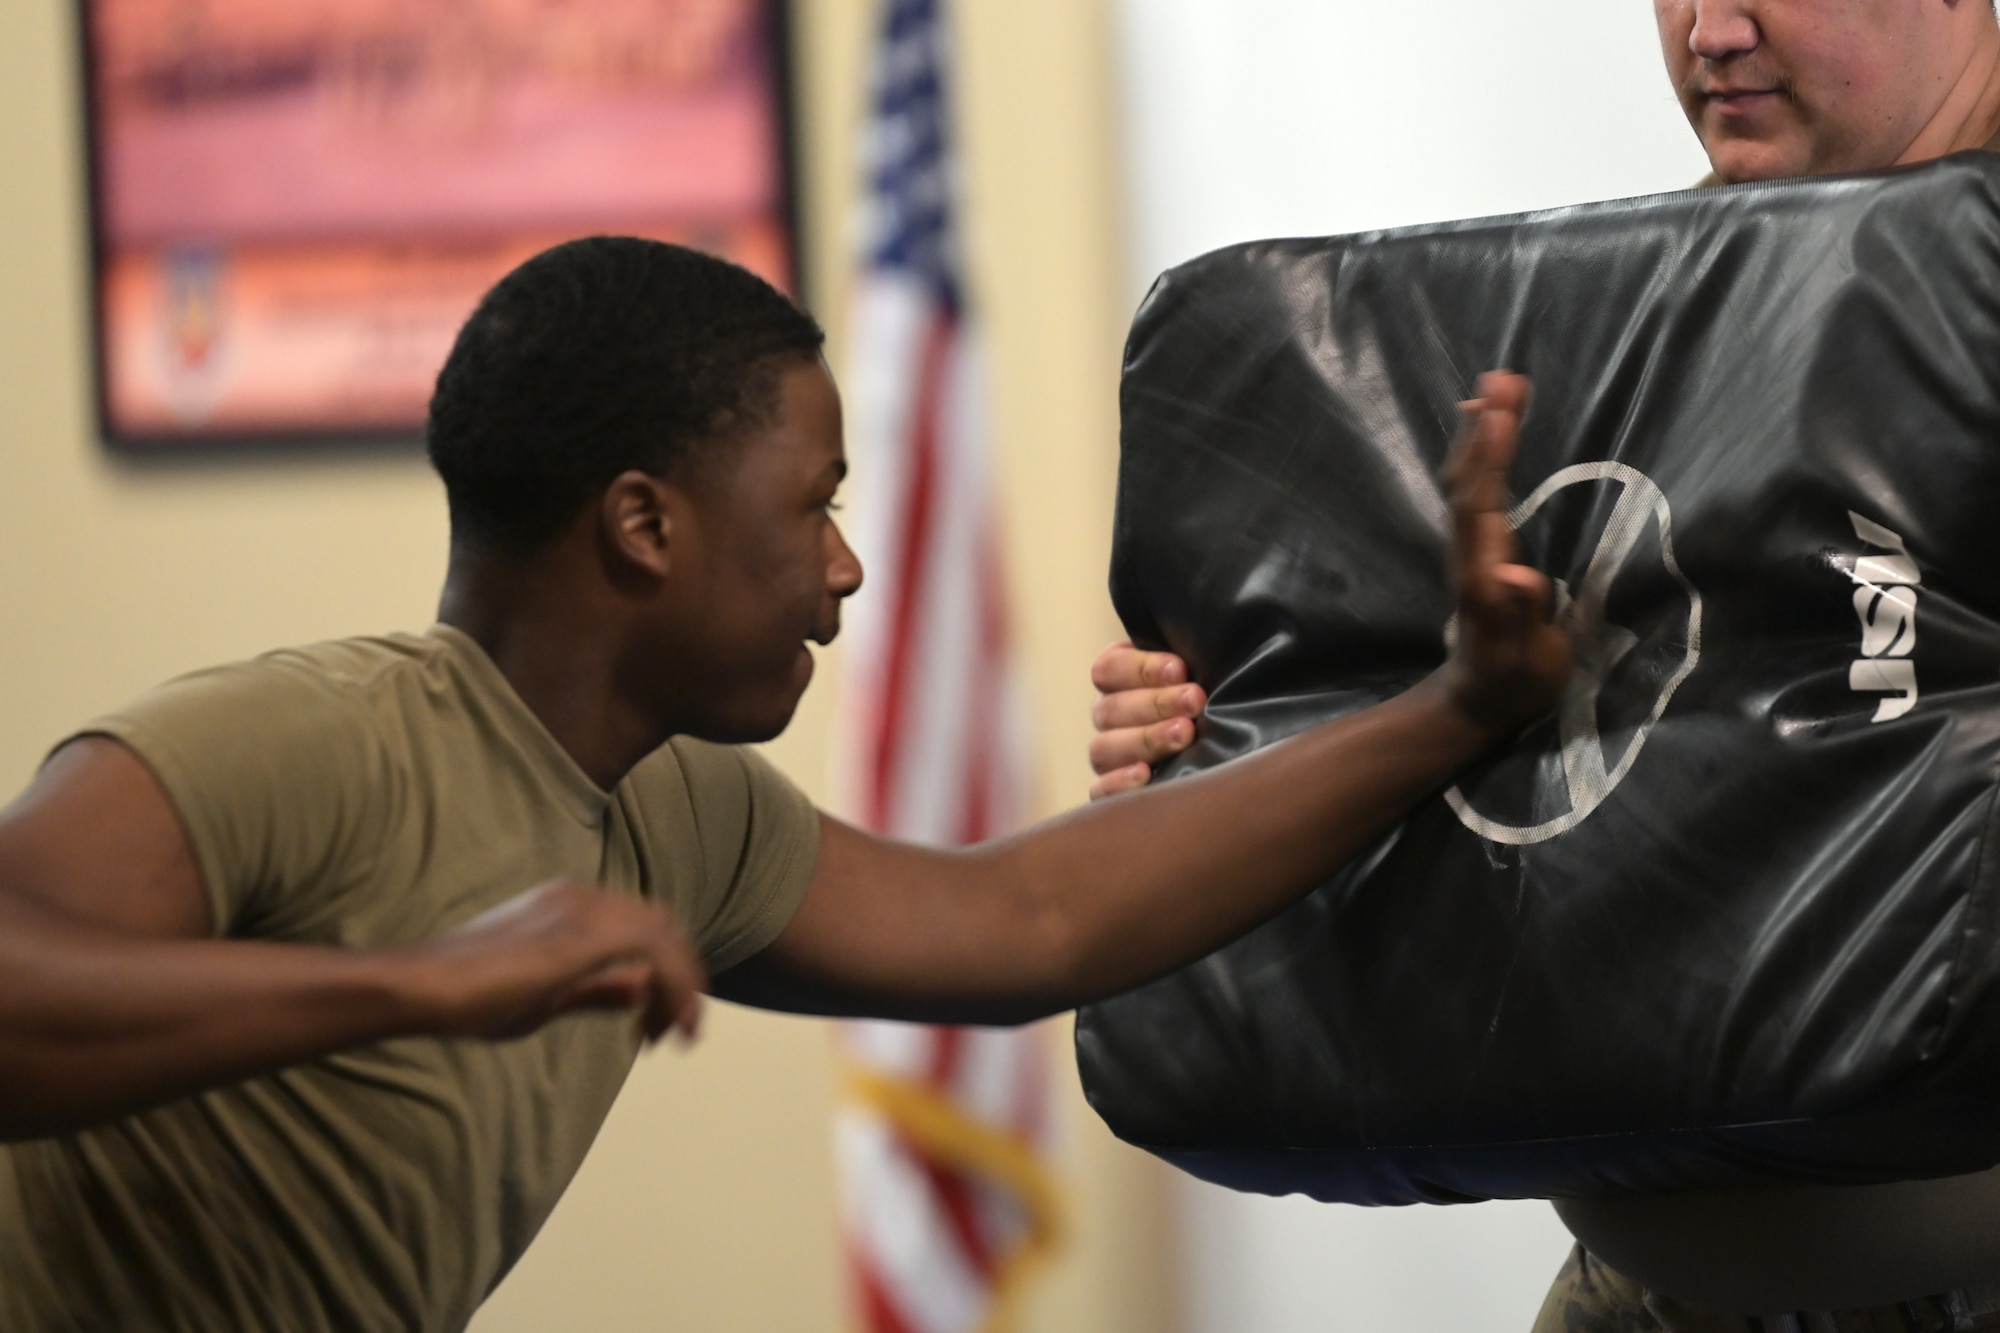 U.S. Air Force Airman 1st Class Michael Jones, 23rd Security Forces squadron installation entry controller, palm-strikes a pad during the first iteration of Krav Maga training at Moody Air Force Base, Georgia, April 13, 2022. Adding new skills to these defenders’ toolbelts will continue developing security forces in more than just the combative aspect. (U.S. Air Force photo by Senior Airman Rebeckah Medeiros)